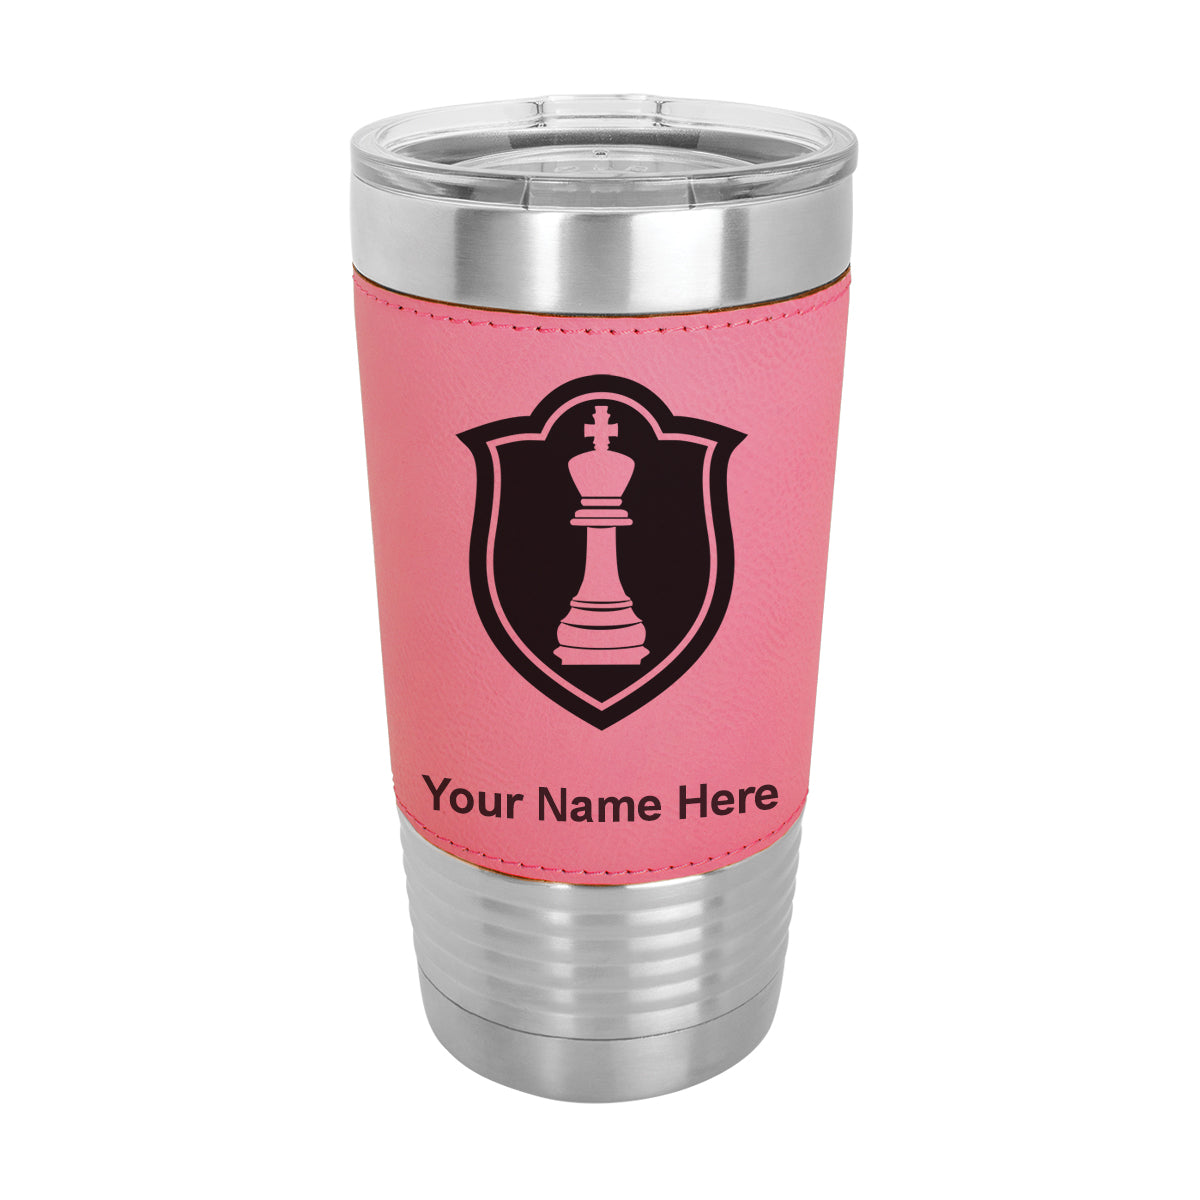 20oz Faux Leather Tumbler Mug, Chess King, Personalized Engraving Included - LaserGram Custom Engraved Gifts